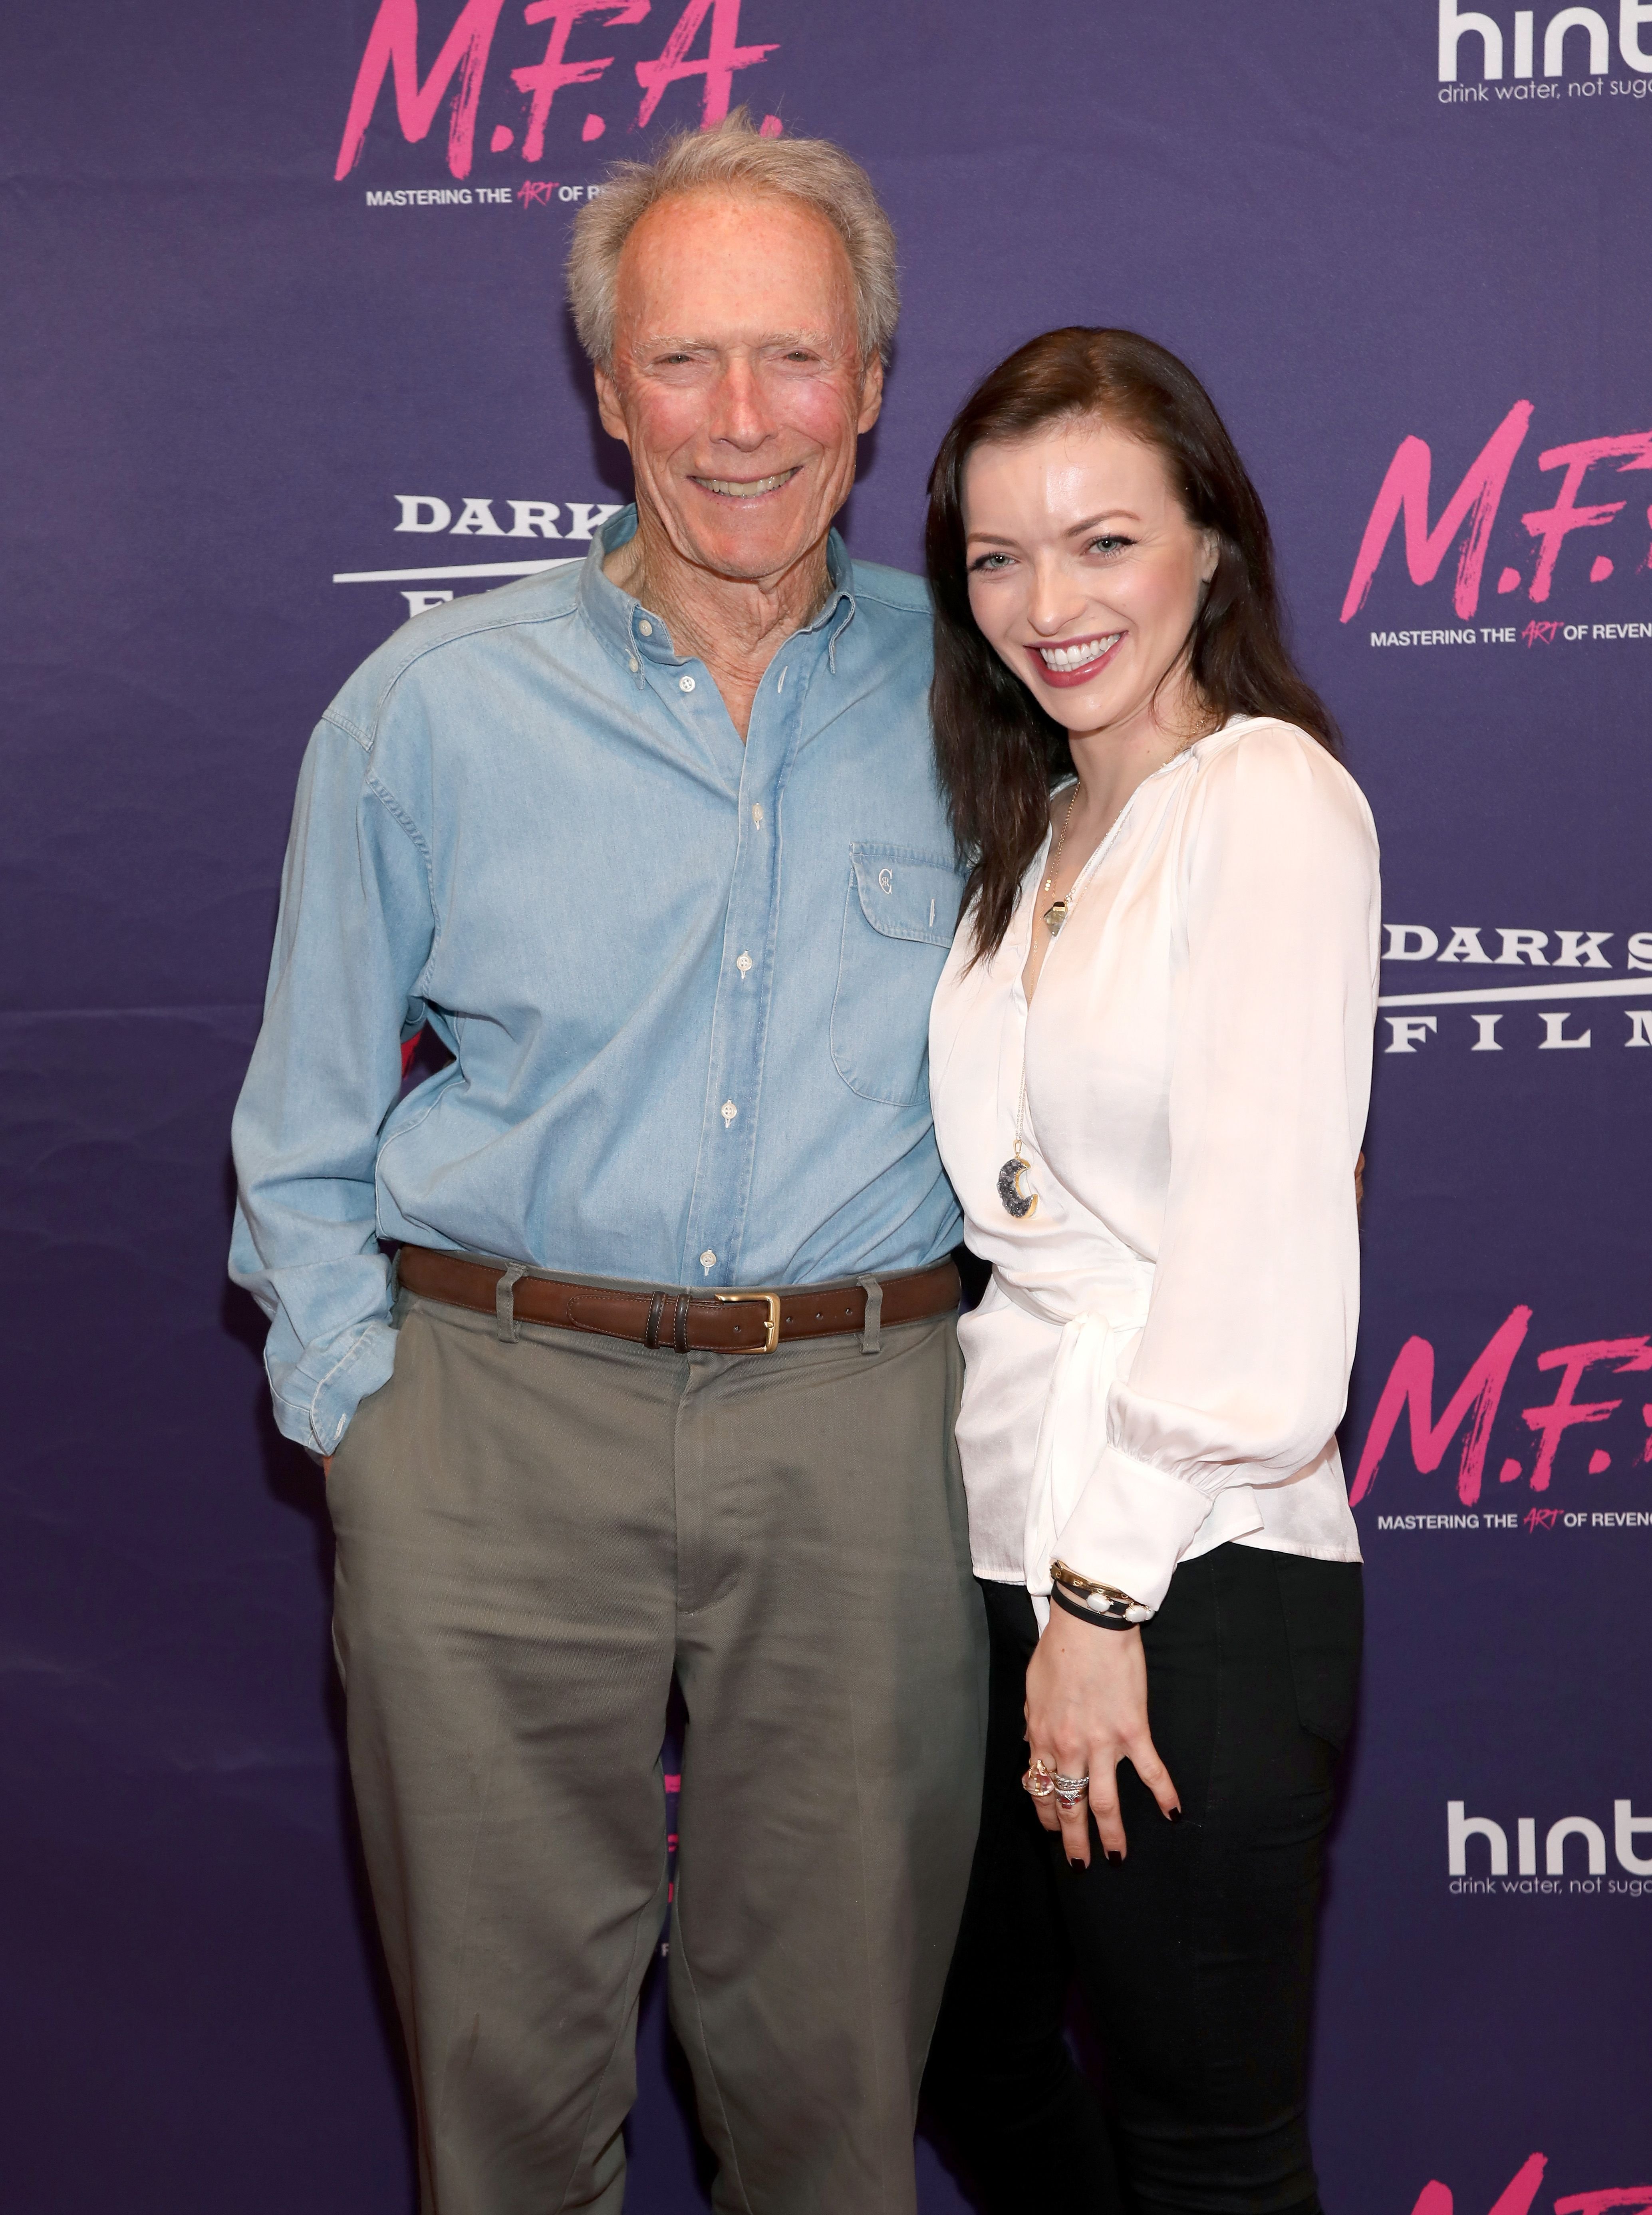 Clint Eastwood and daughter Francesca Eastwood at the Premiere Of Dark Sky Films' "M.F.A." at The London West Hollywood on October 2, 2017 in West Hollywood, California | Photo: Getty Images